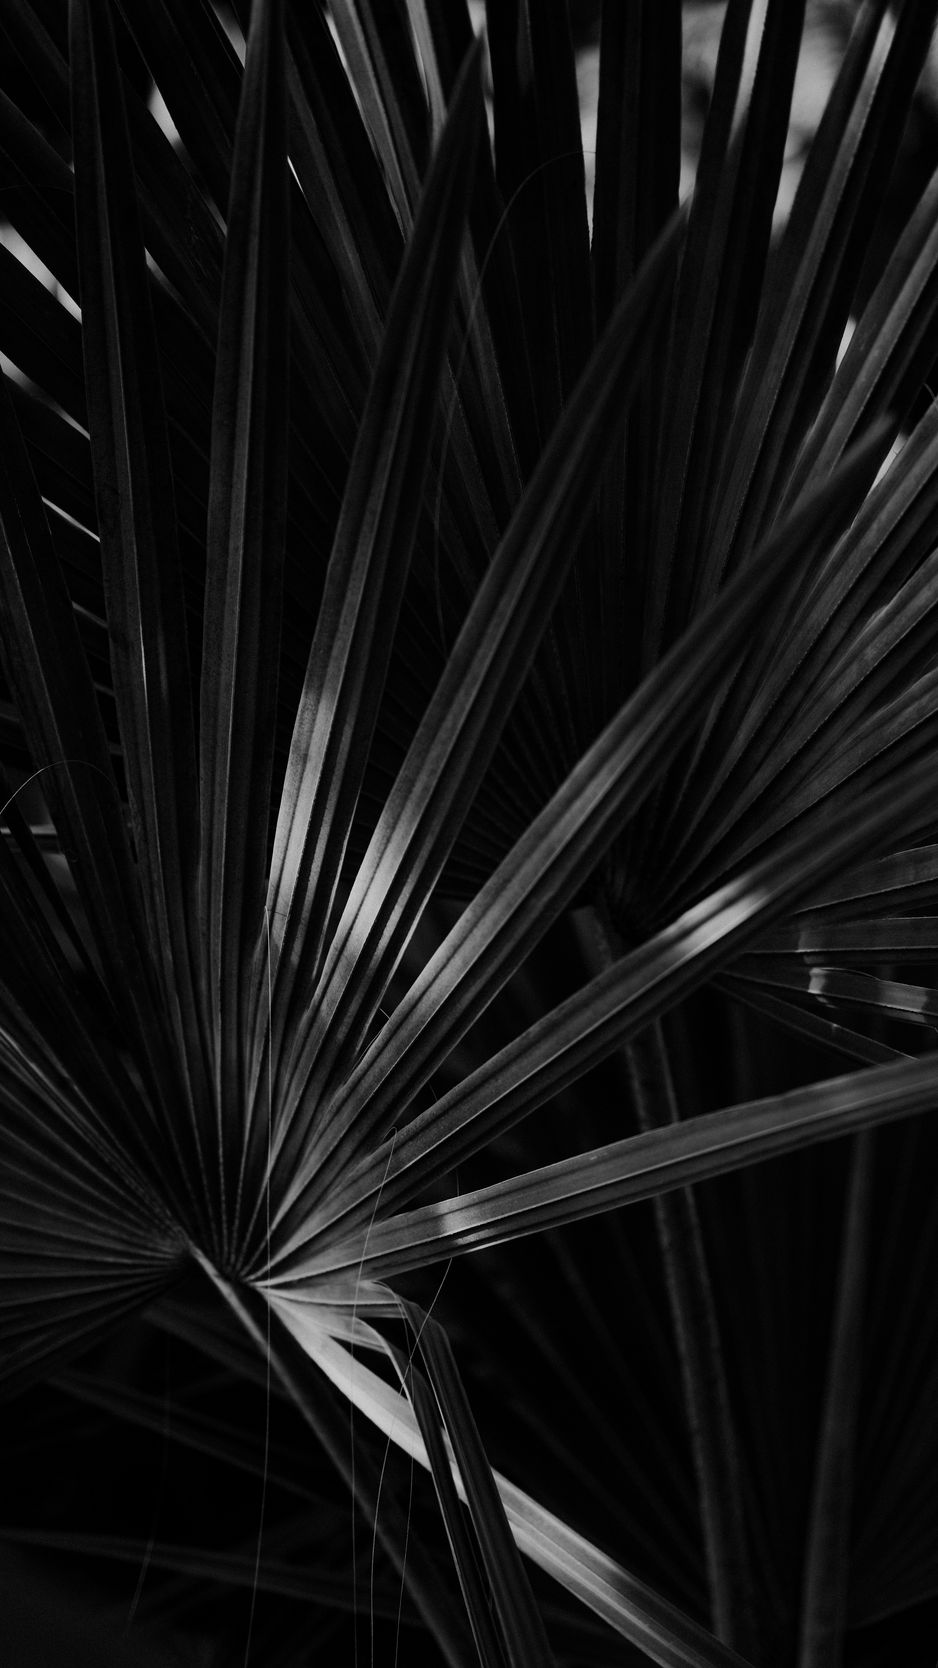 Download wallpaper 938x1668 bw, leaf, leaves, dark iphone 8/7/6s/6 for ...